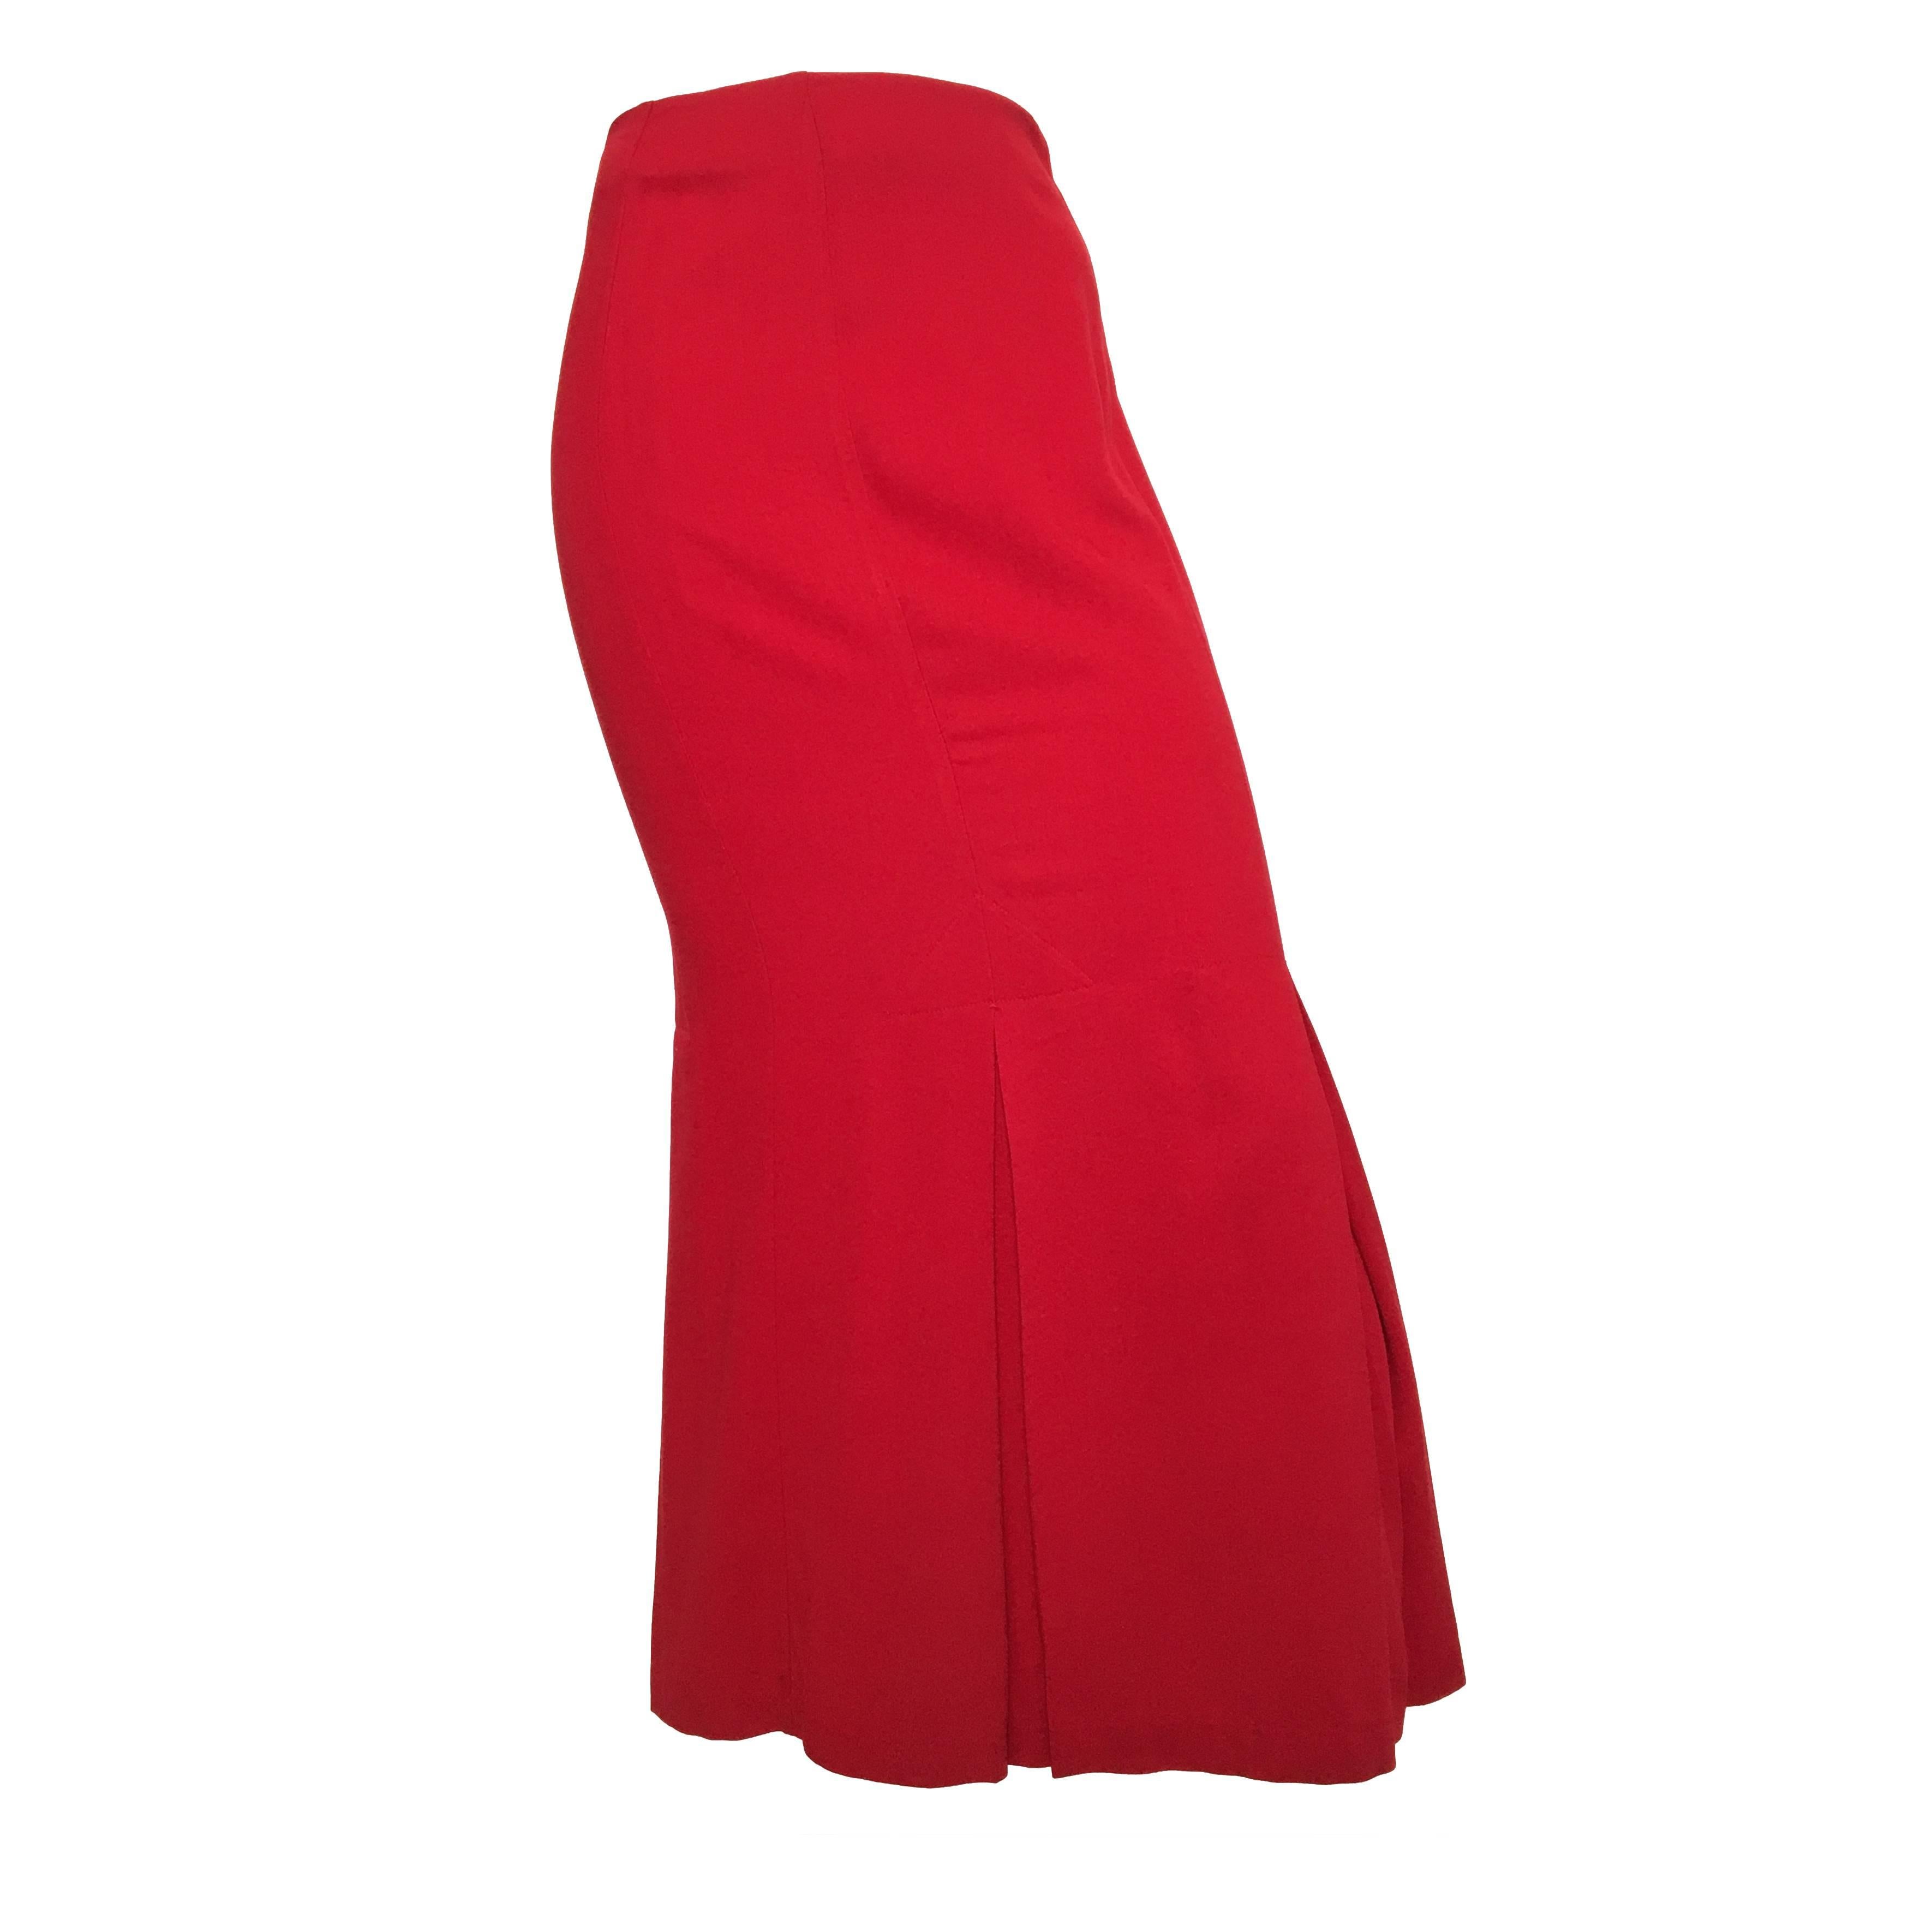 Norma Kamali Red Cotton Long Pleated Skirt Size 4. For Sale